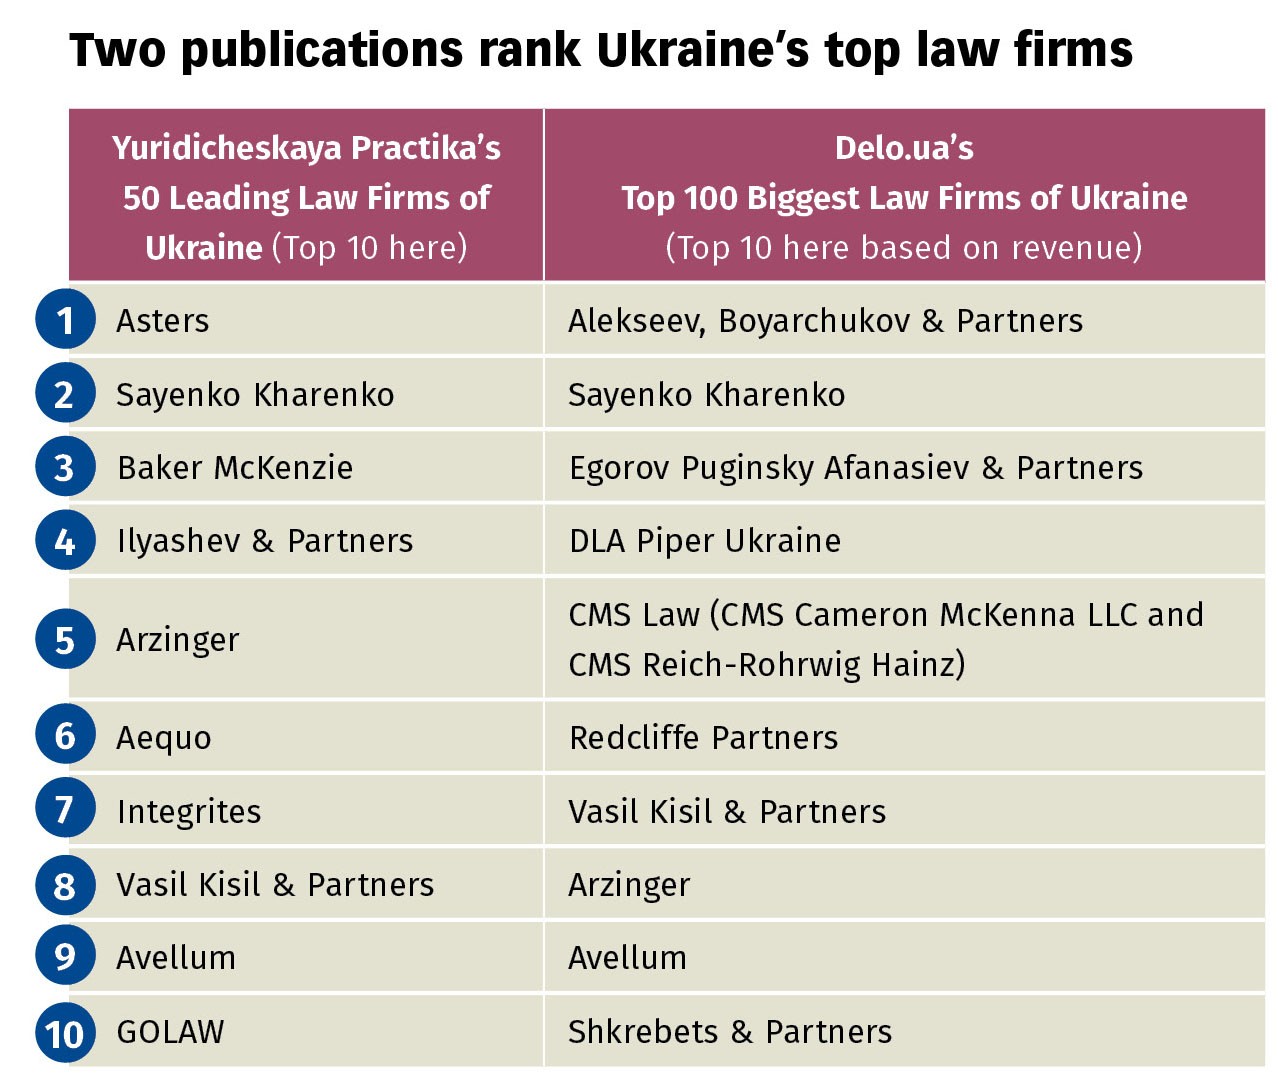 Yuridicheskaya Practika, a legal journal, attempts to rank the best law firms while business website delo.ua ranks by reported revenue.